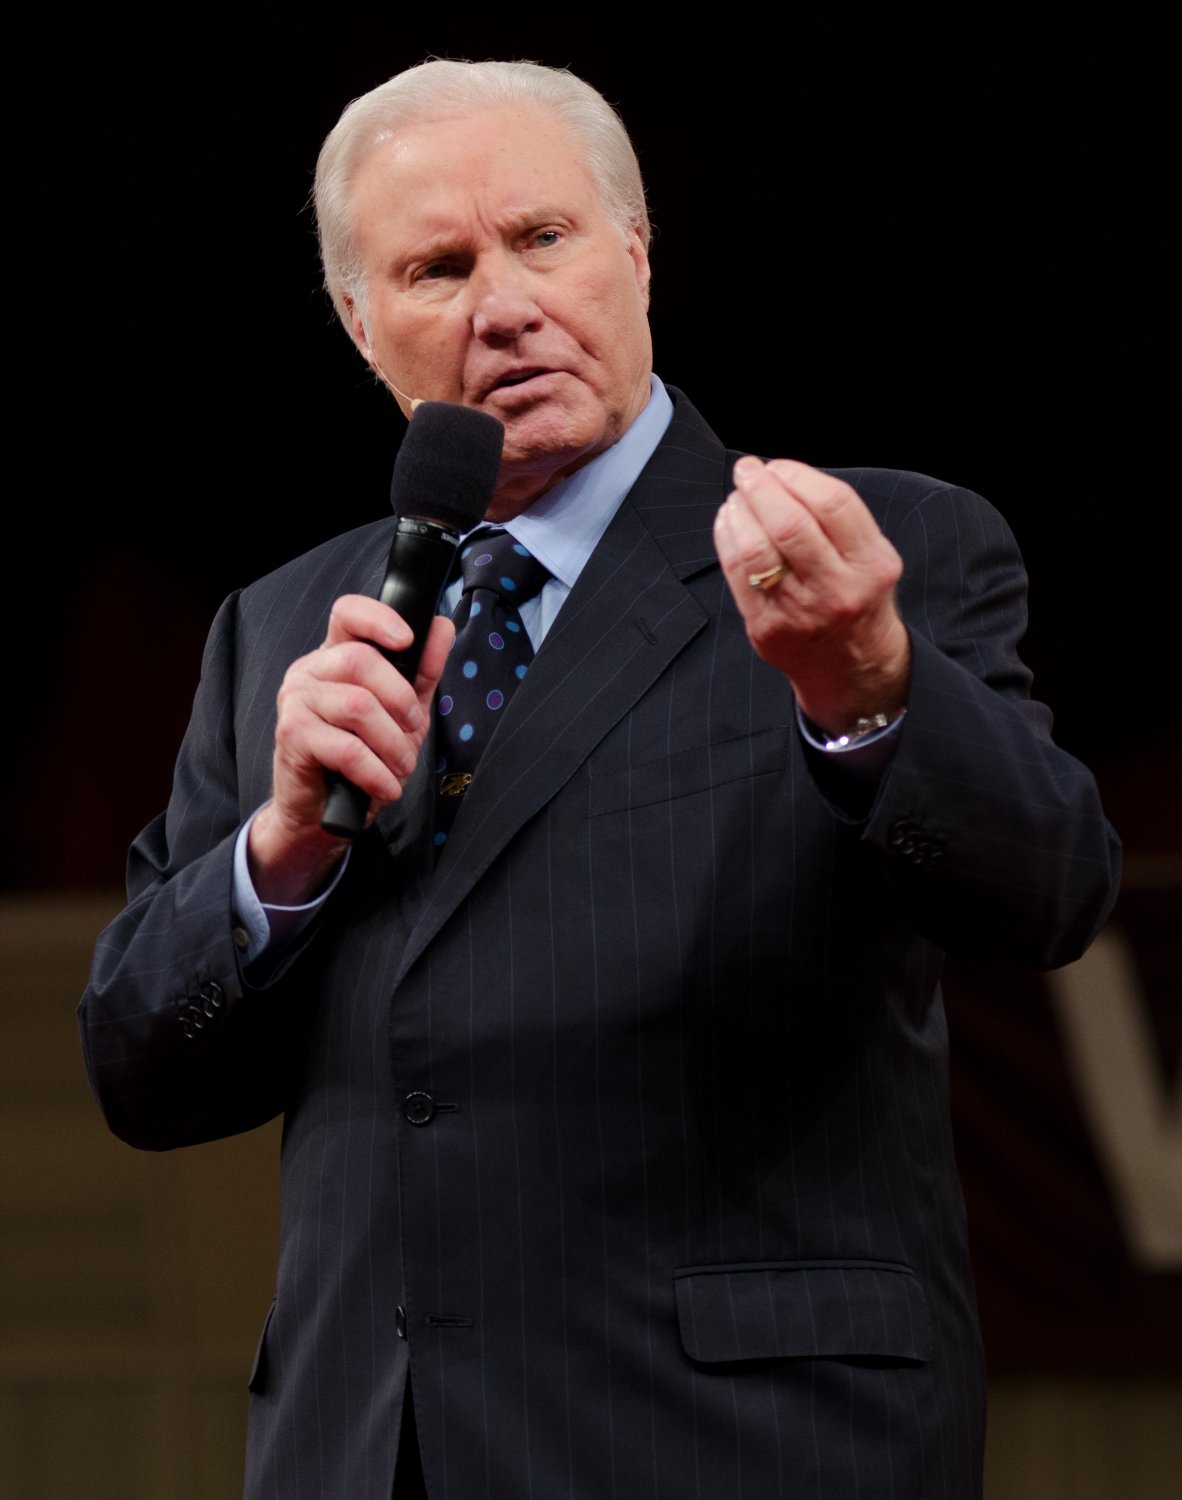 Jimmy Swaggart - "I Have Sinned"